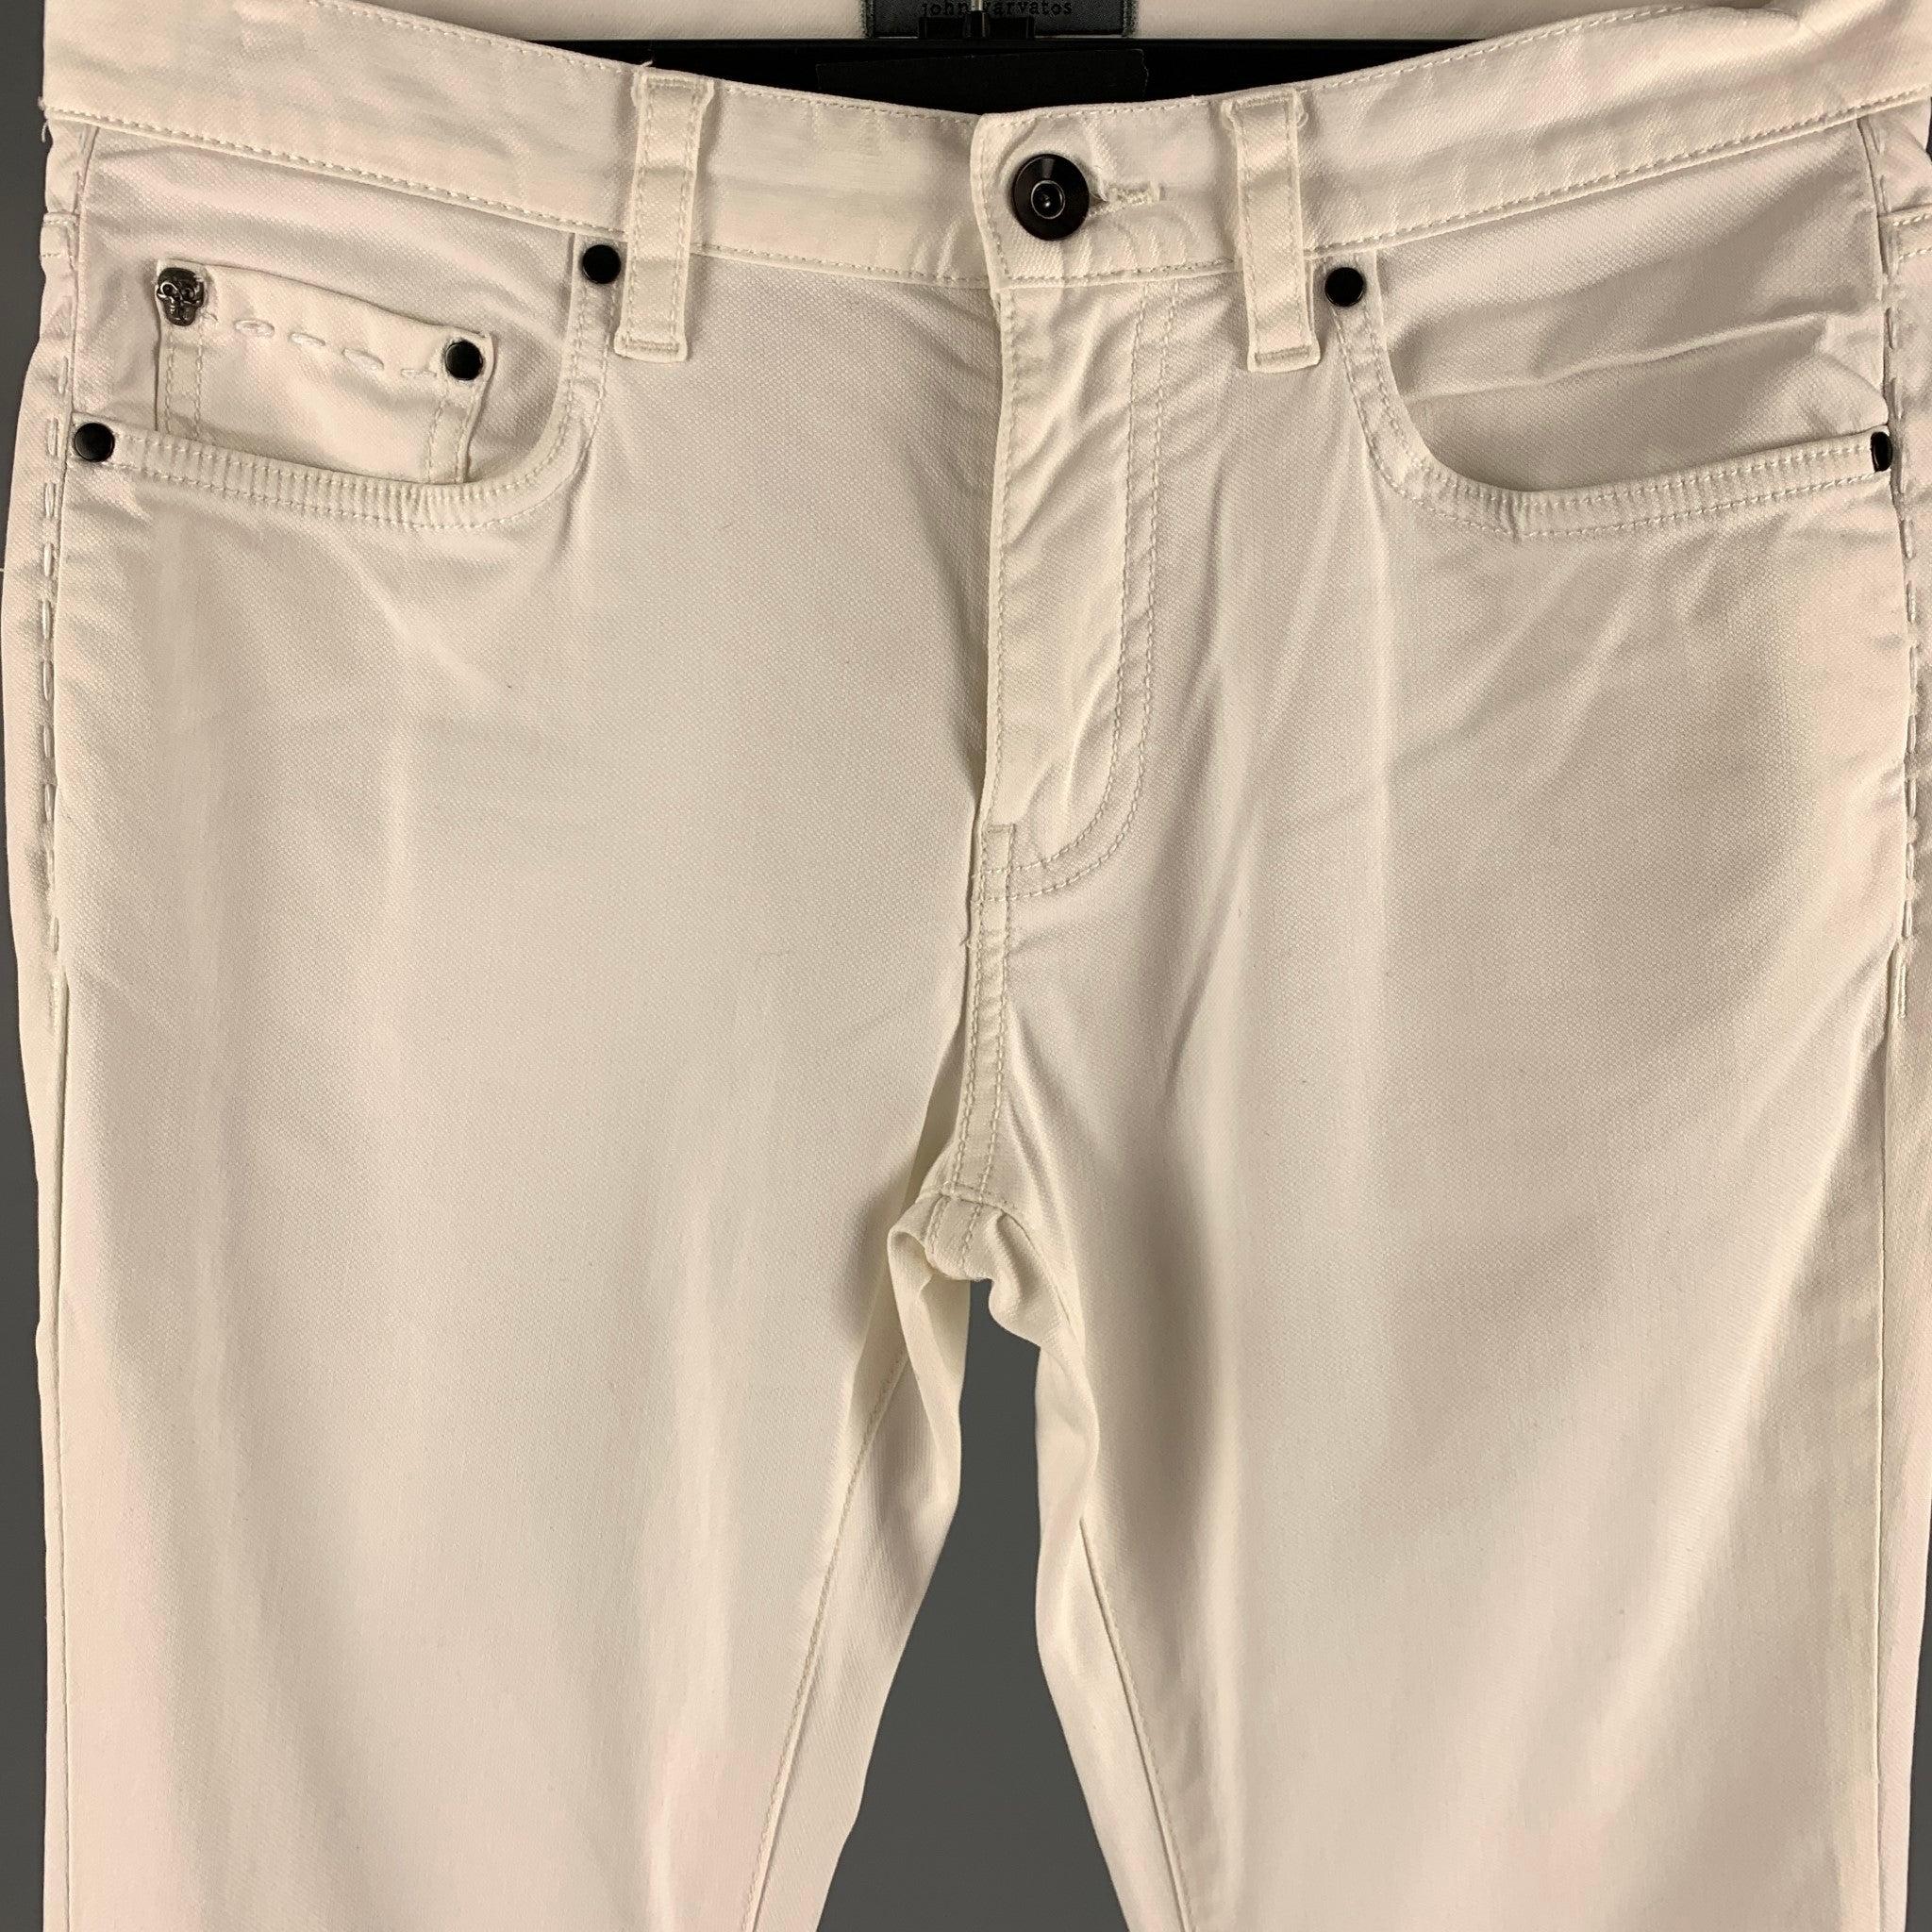 JOHN VARVATOS Size 30 Off White Cotton Elastane Jeans In Good Condition For Sale In San Francisco, CA